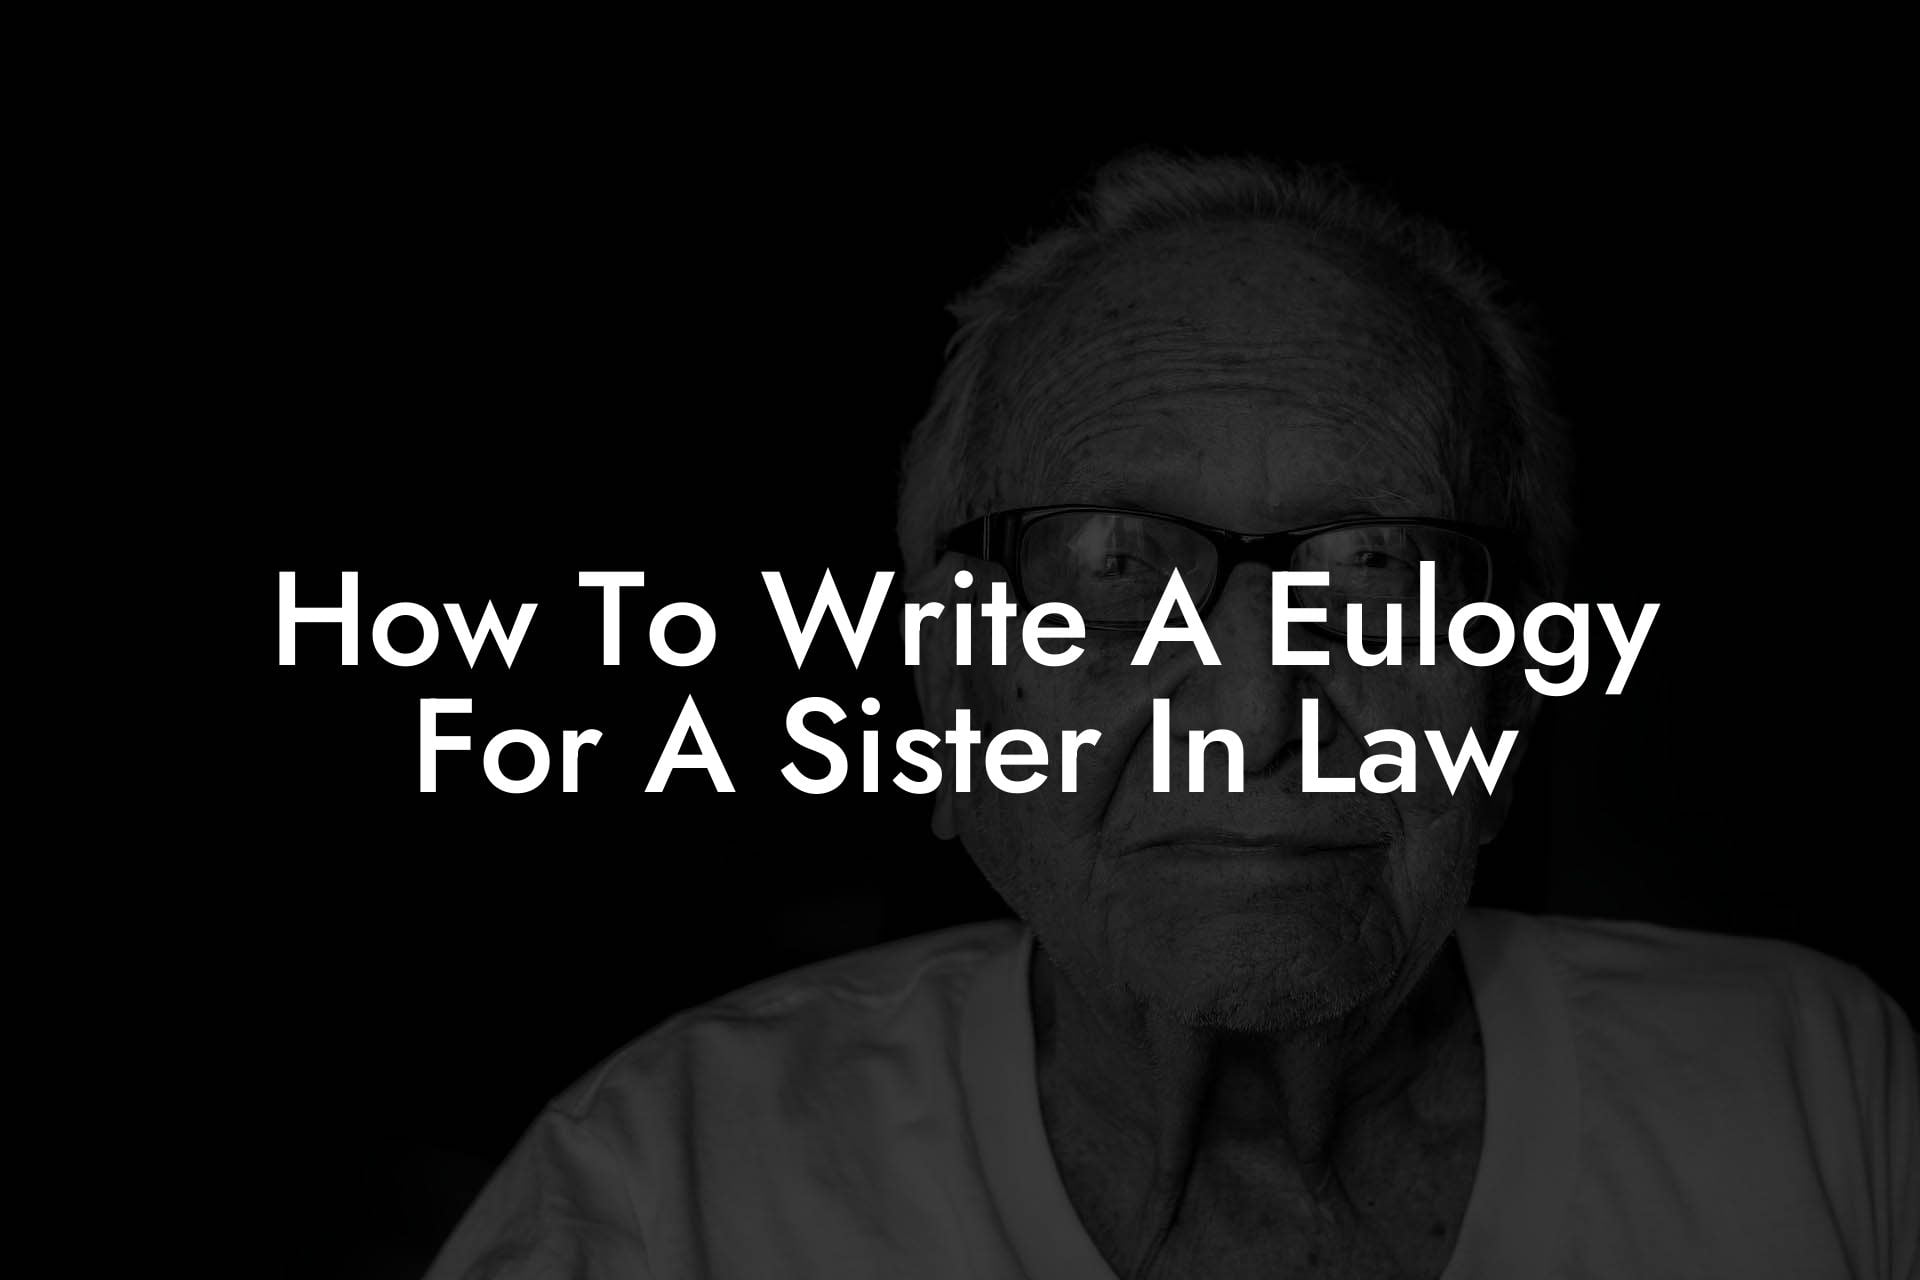 How To Write A Eulogy For A Sister In Law